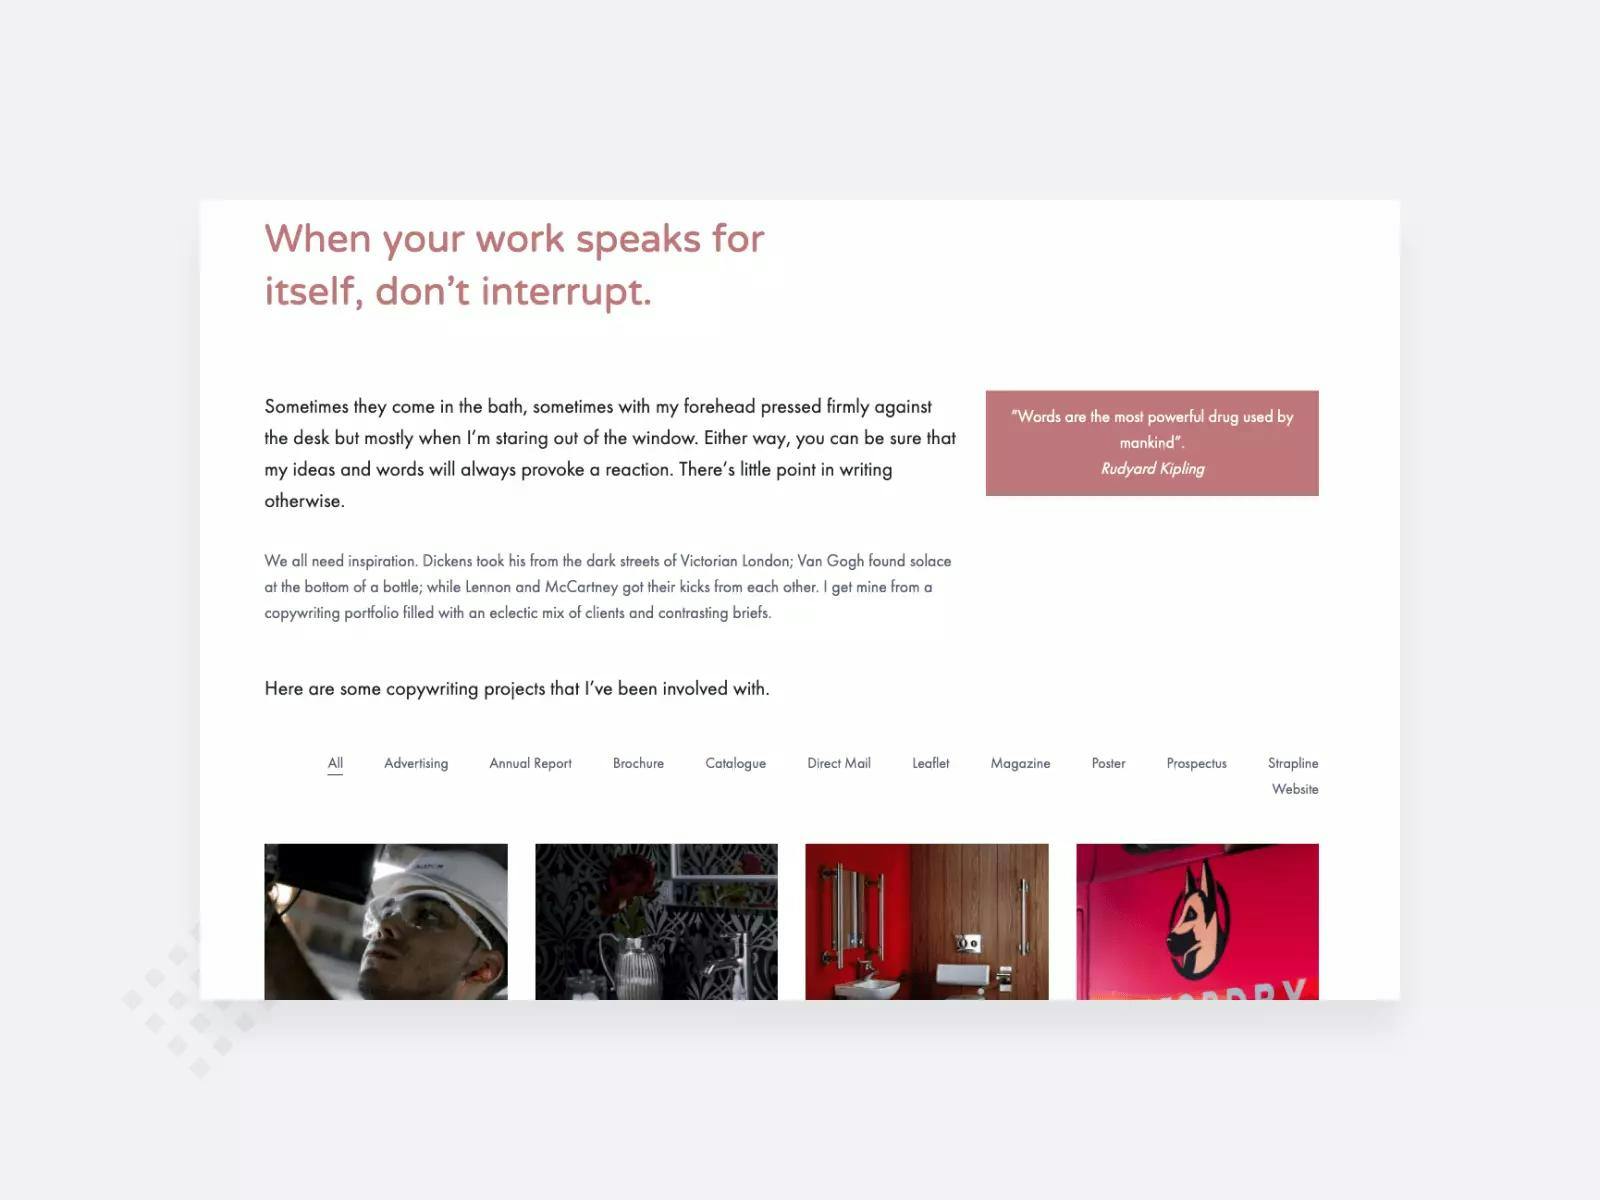 Tom Rigby's copywriting portfolio with filters to find copywriting samples and projects more easily